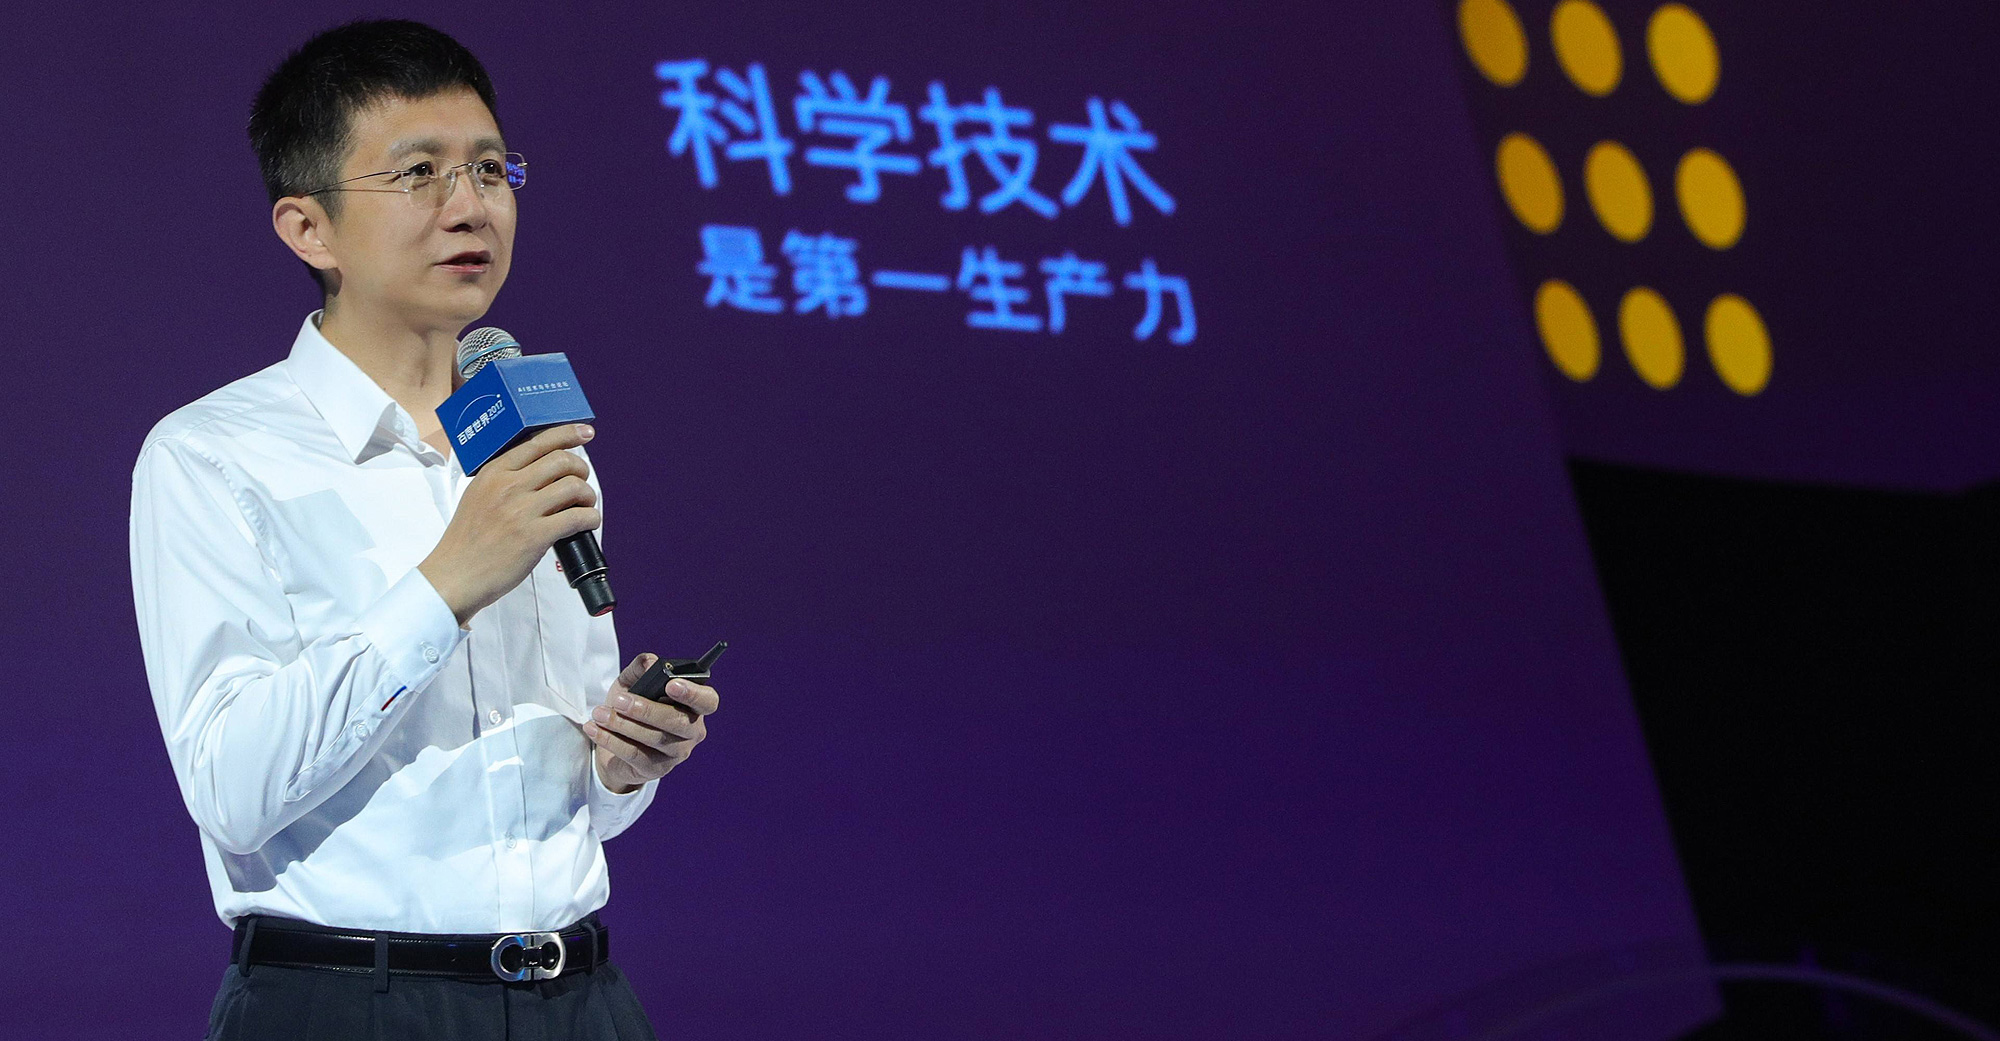 Haifeng Wang became chief technology officer at Baidu in 2019.